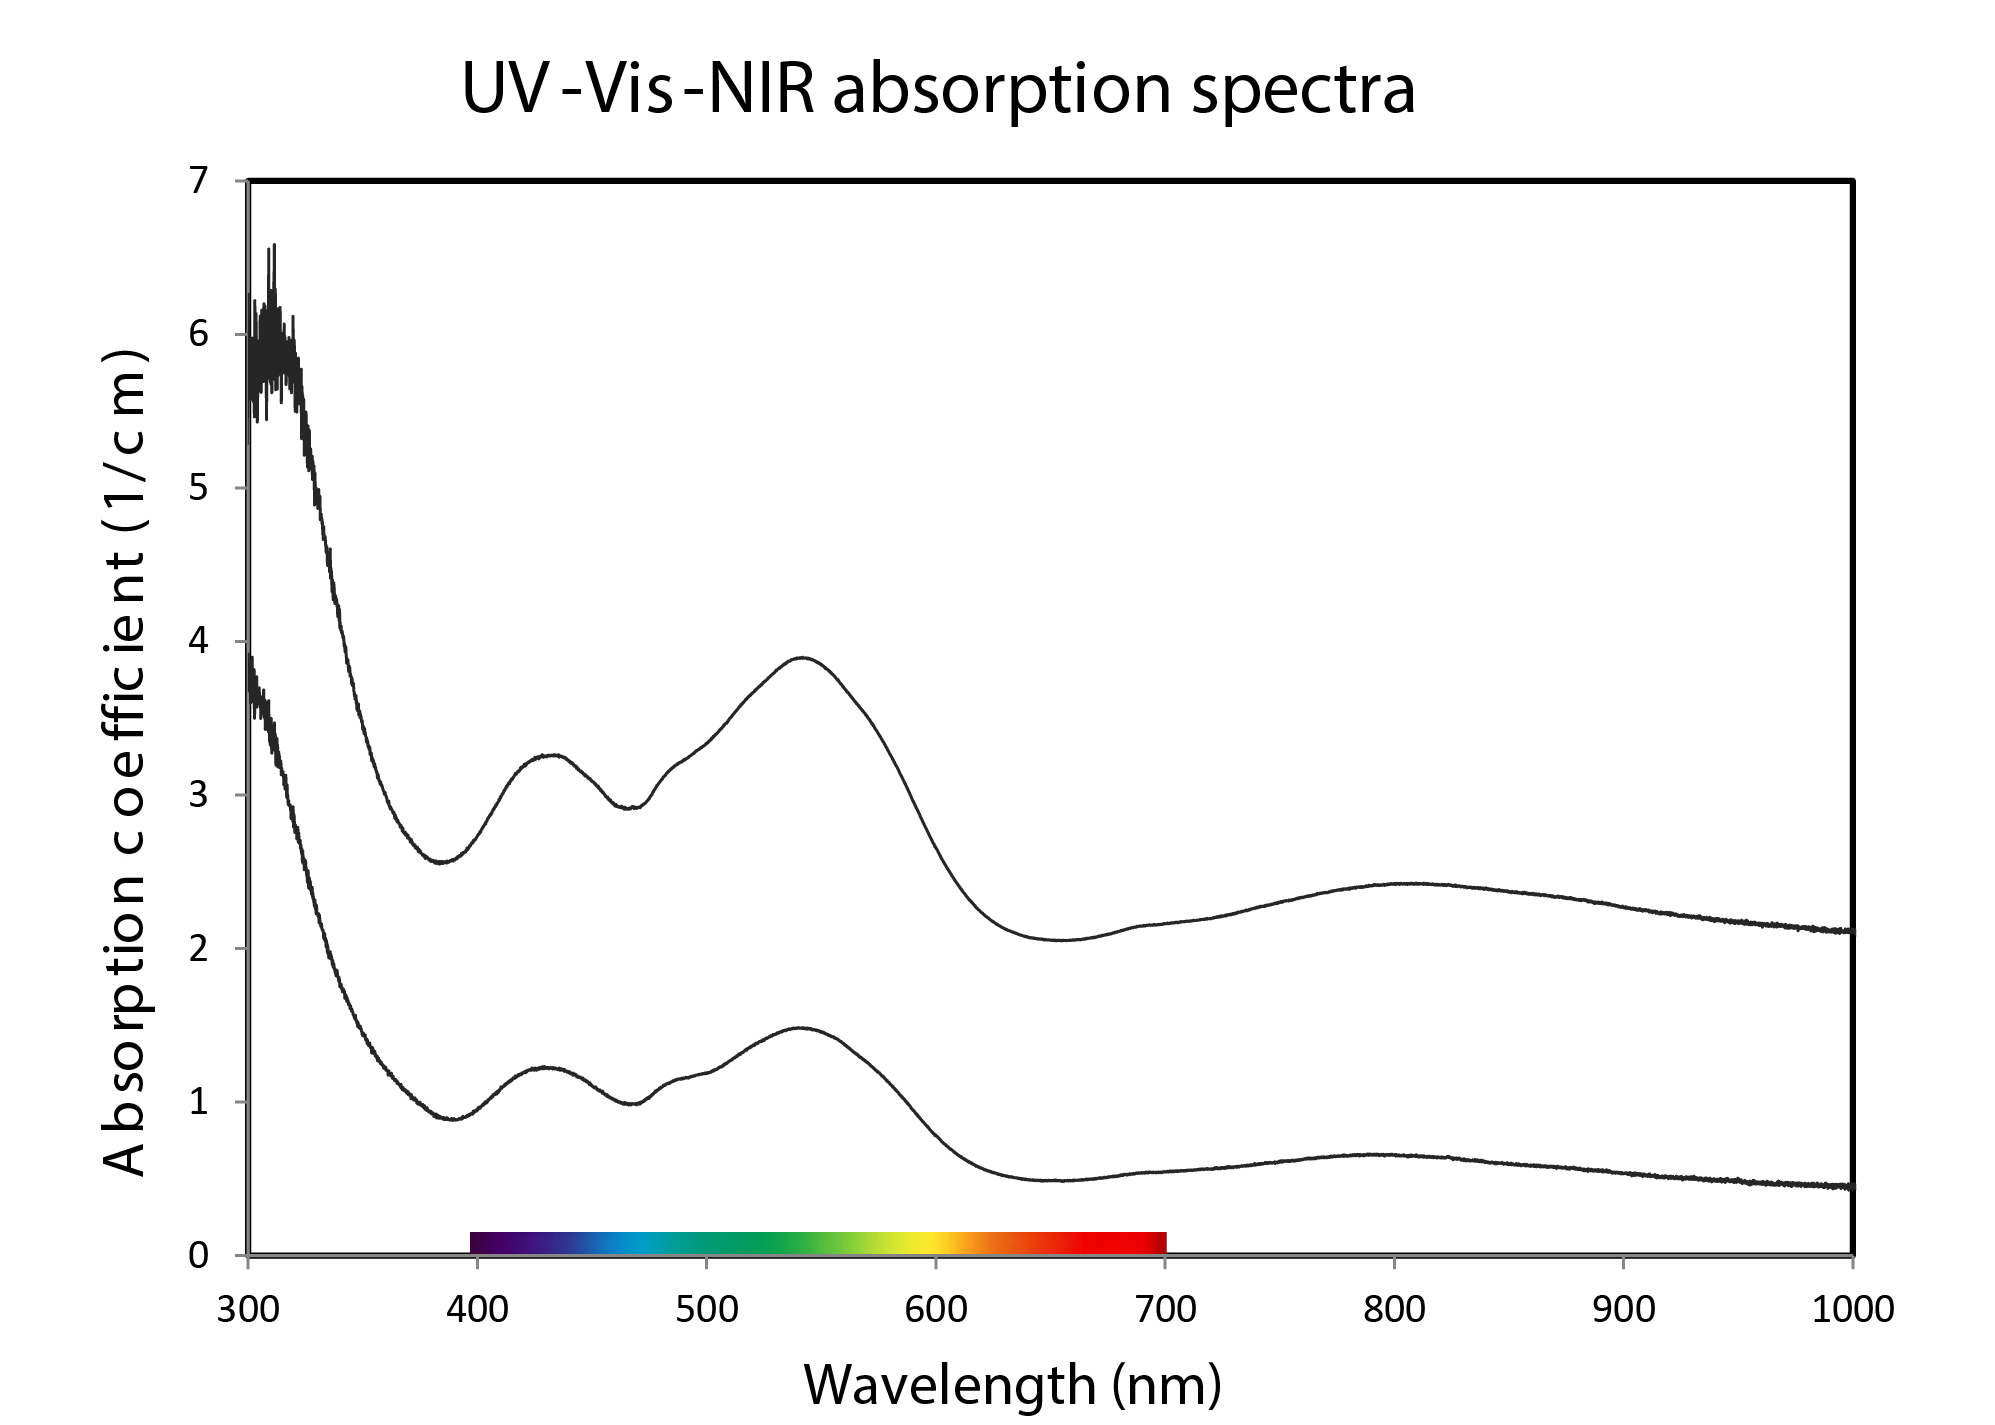 The UV-Vis-NIR spectra obtained from this material exhibit the classic absorptions due to the presence of Co2+ with two broad bands with the dominant absorption centred at ≈ 535 nm and the secondary at ≈ 432 nm. 